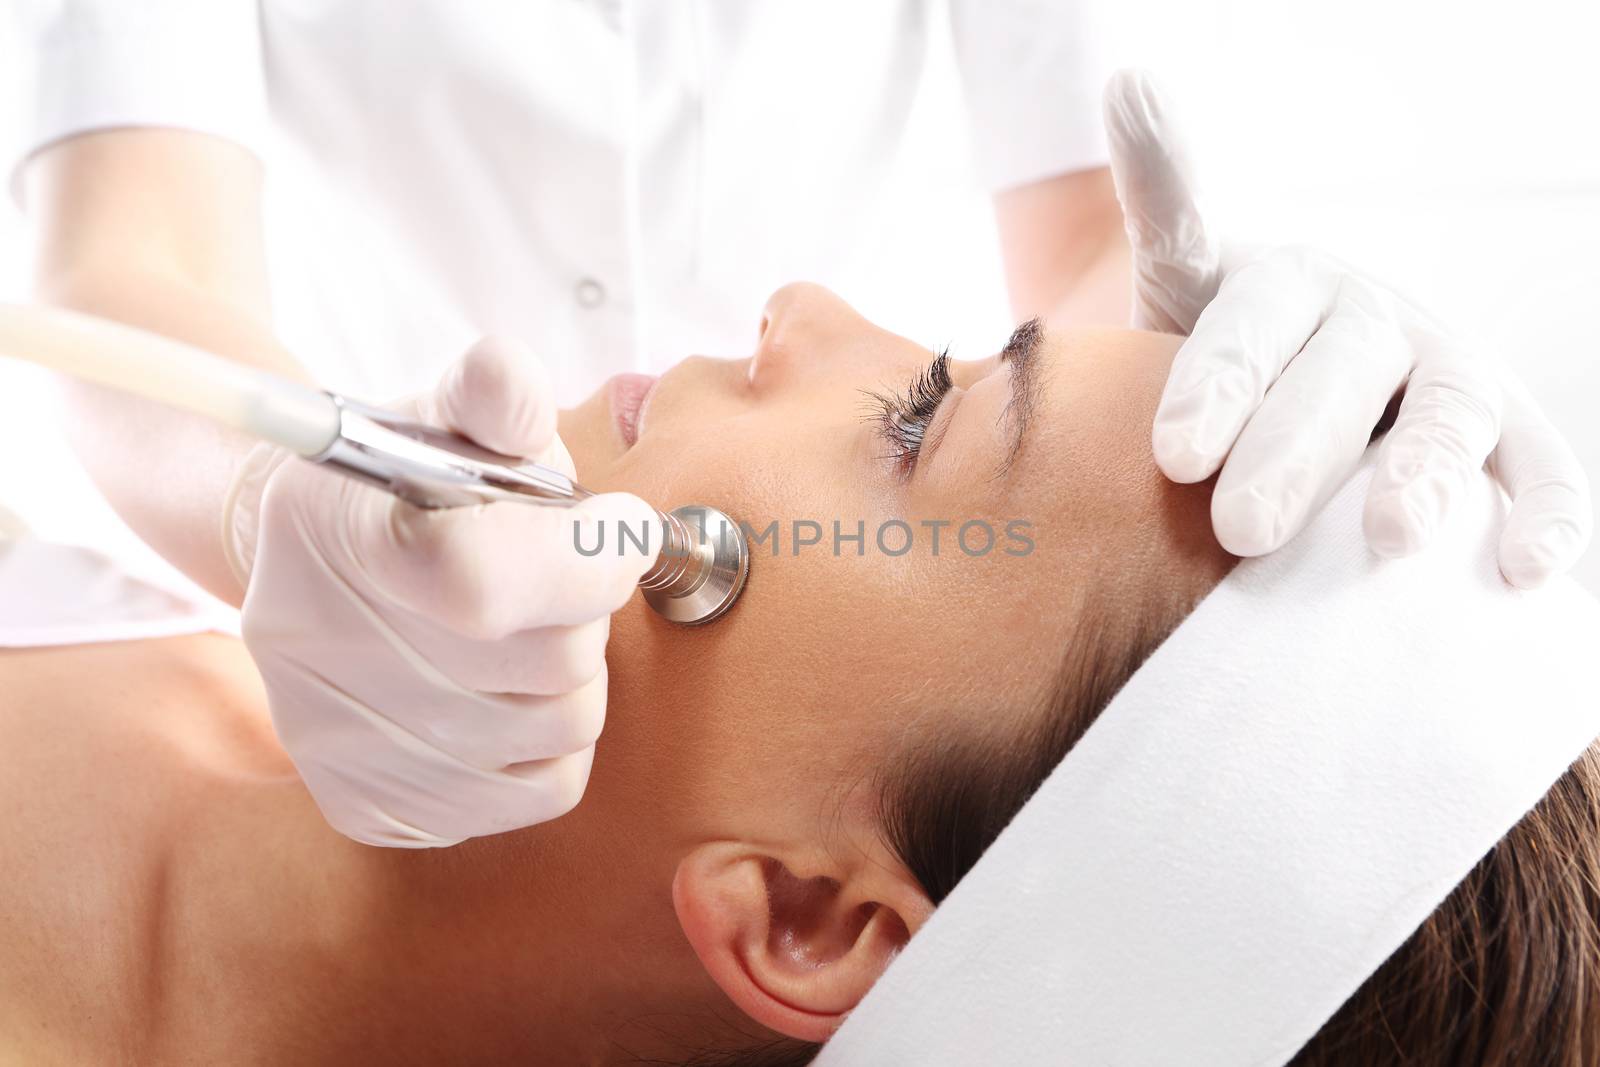 Relaxed woman during a microdermabrasion treatment in beauty salon by robert_przybysz